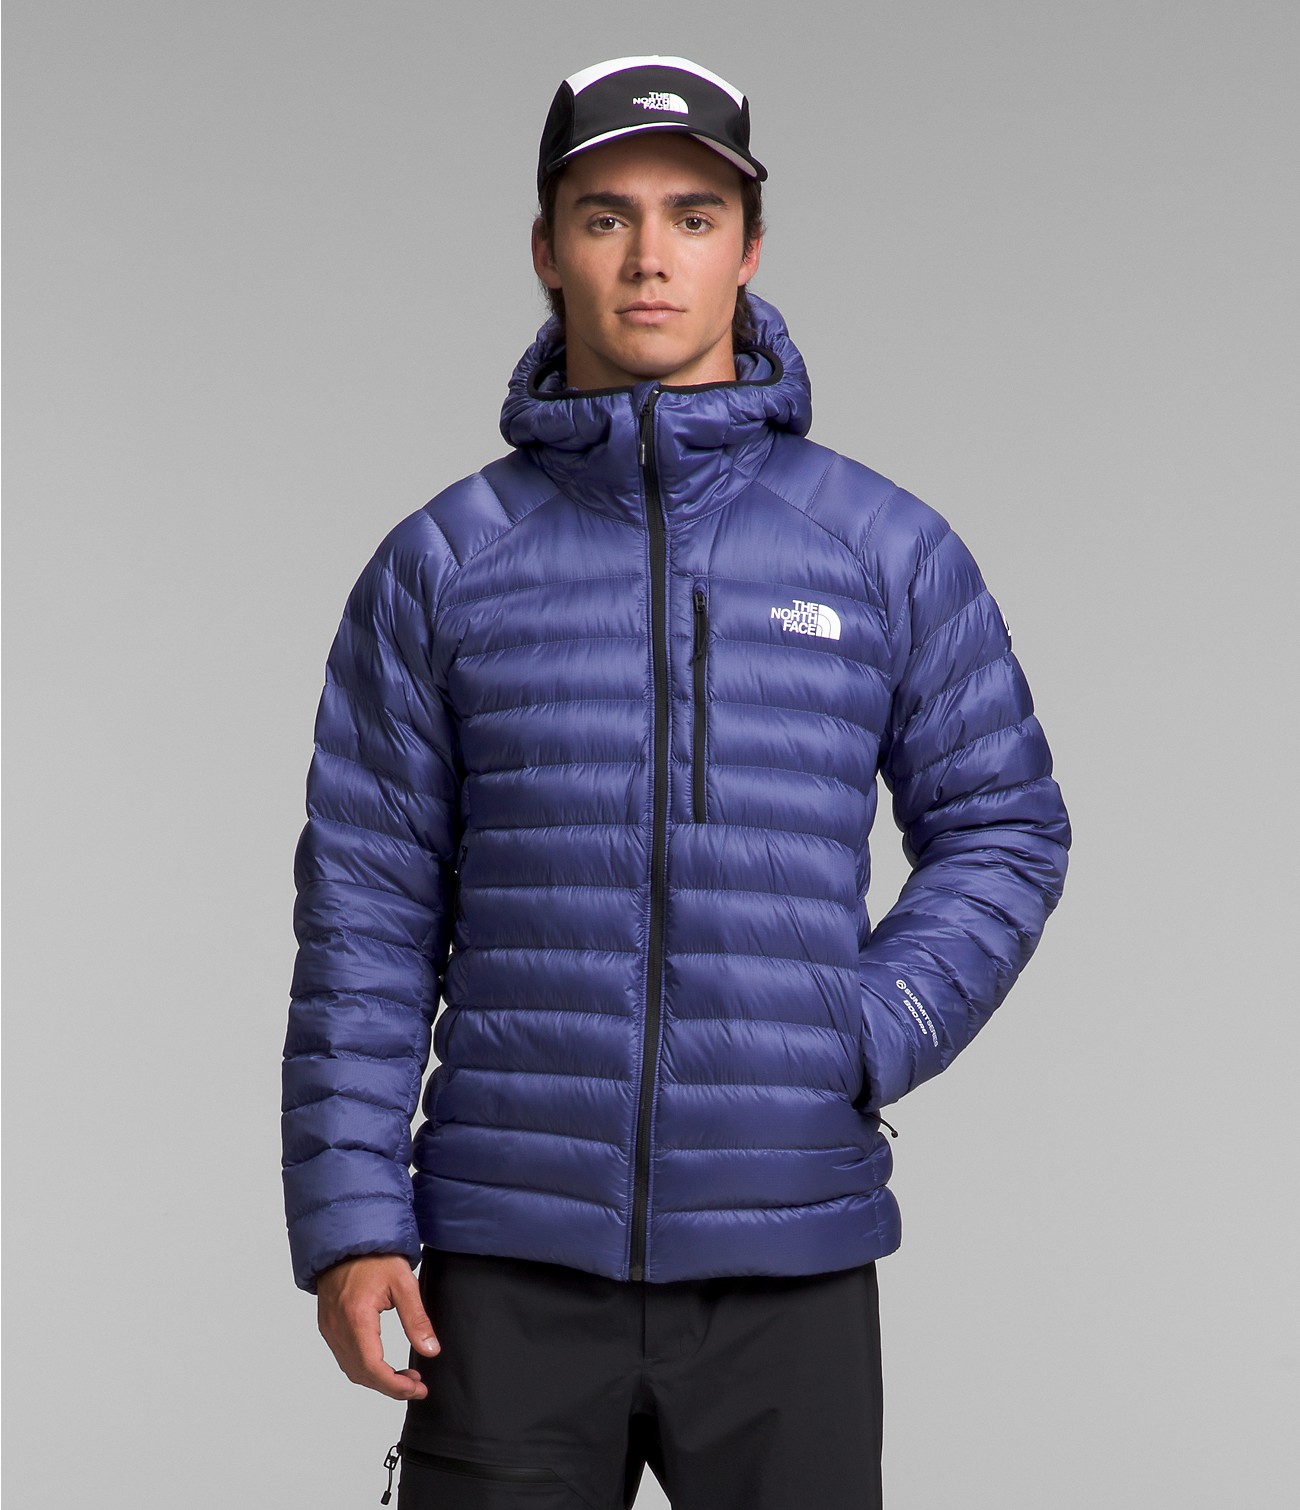 Unlock Wilderness' choice in the Cotopaxi Vs North Face comparison, the Summit Series Breithorn Hoodie by The North Face